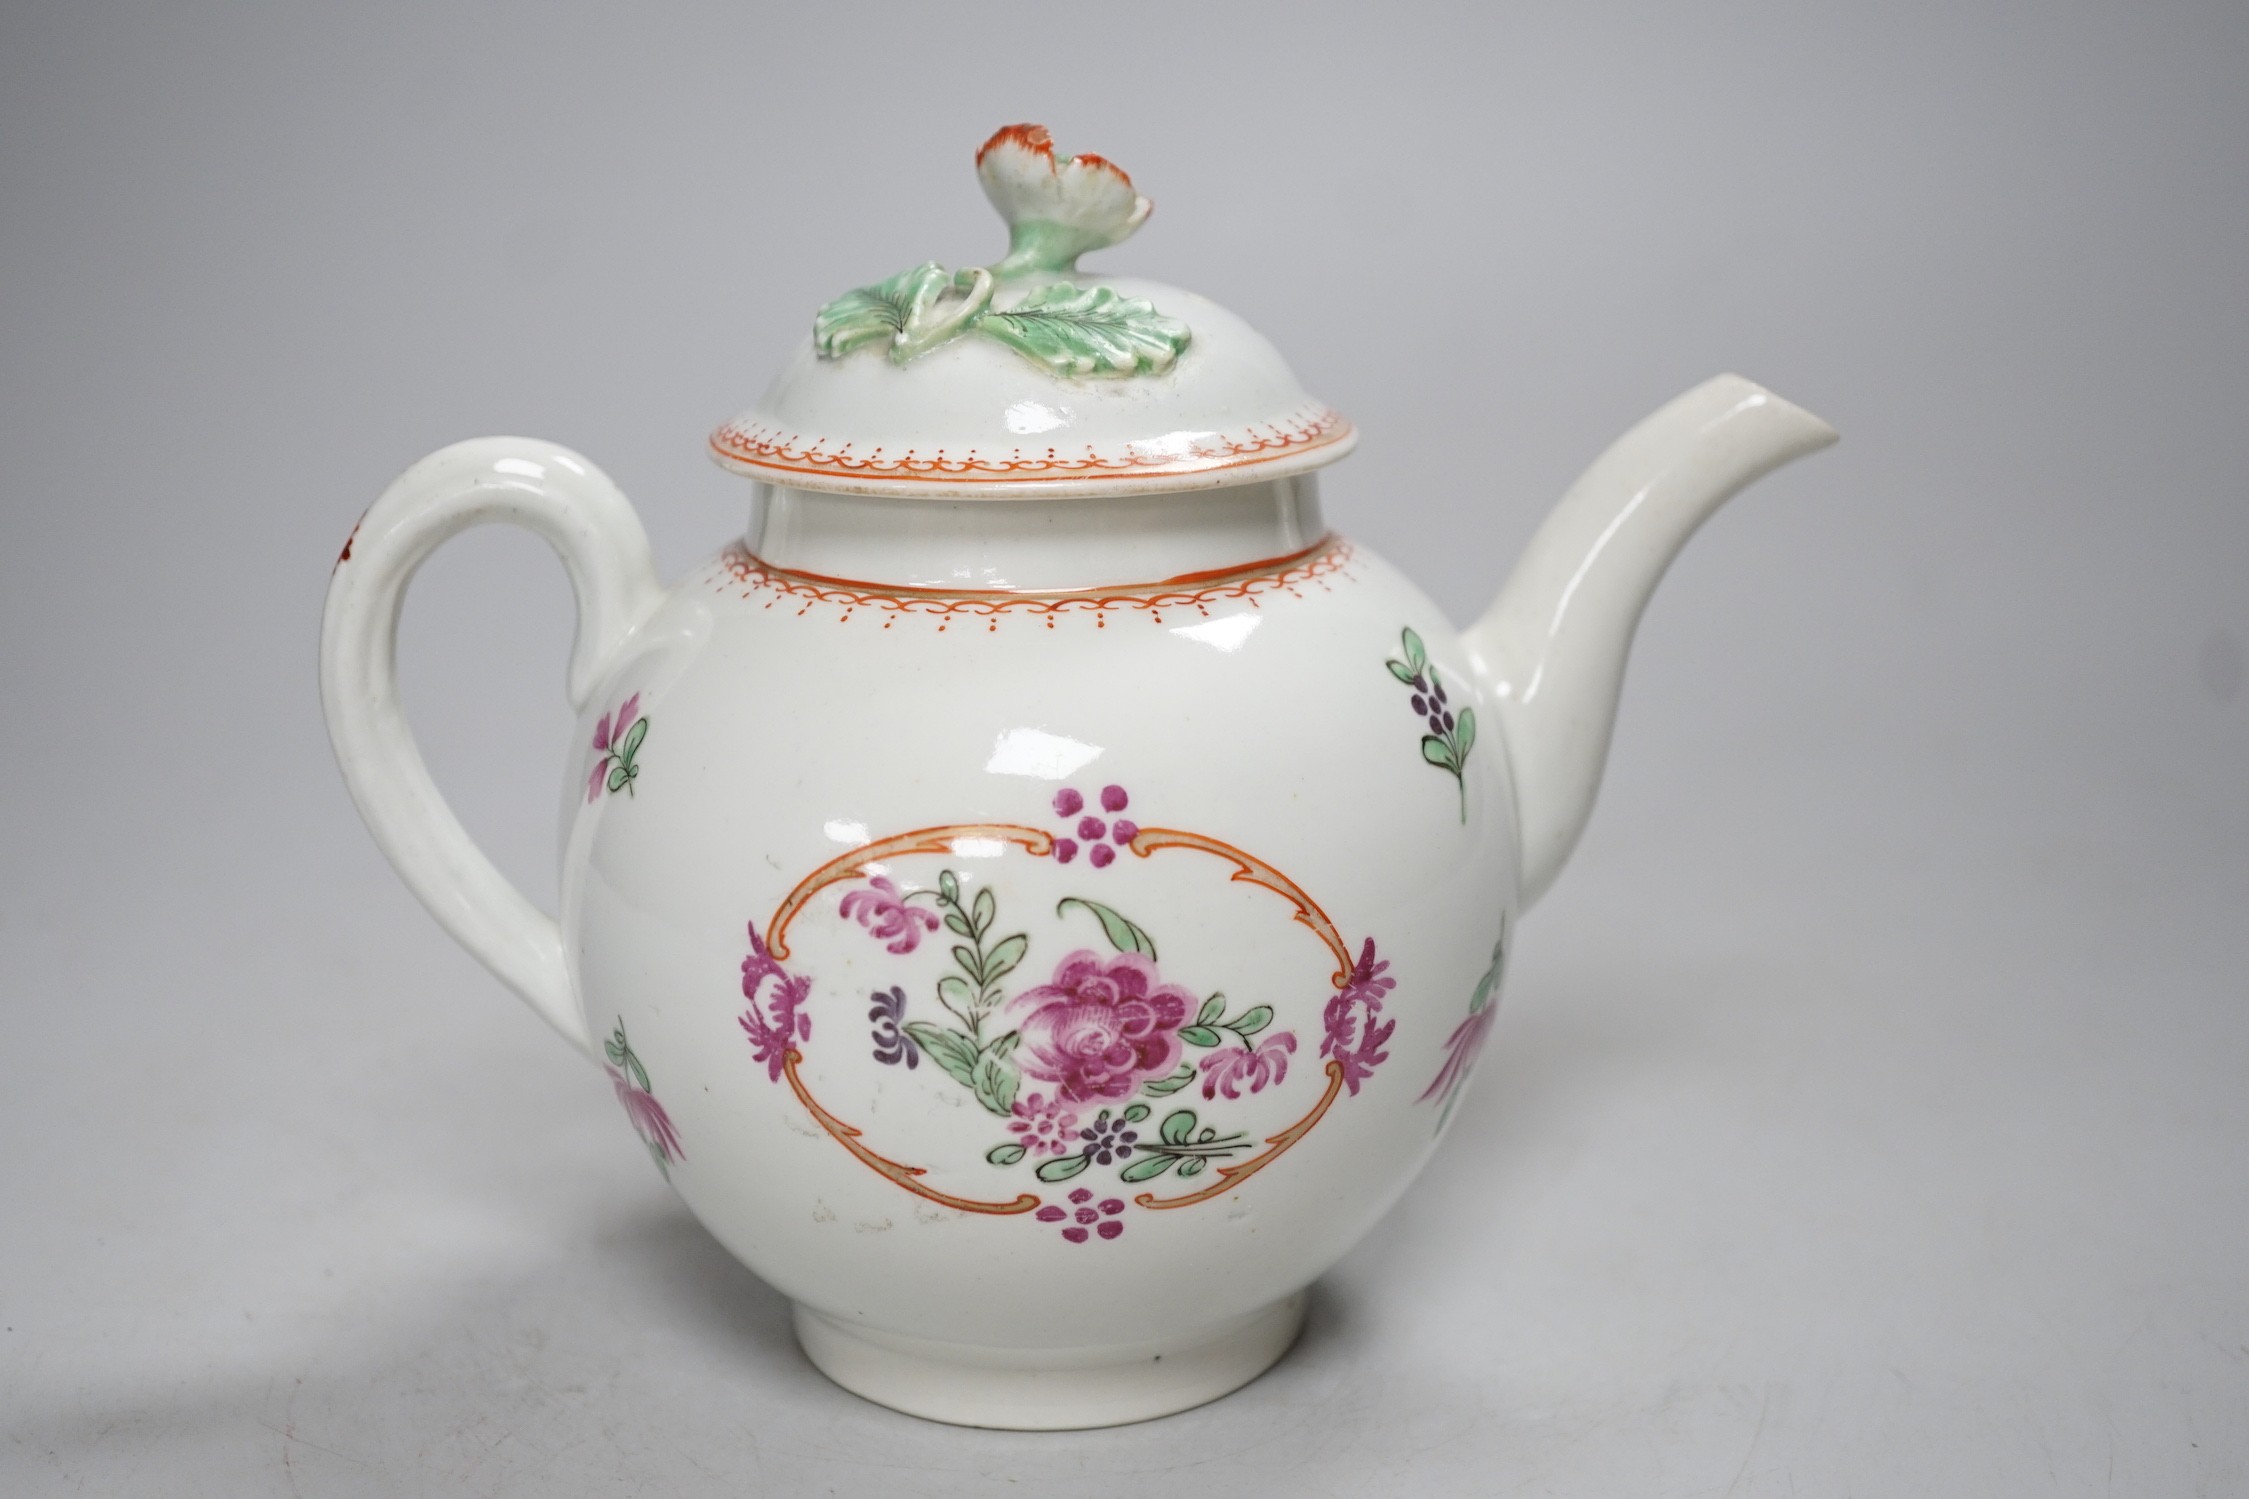 An 18th century Worcester teapot and cover painted in Chinese export style with flowers in an oval - Image 3 of 6